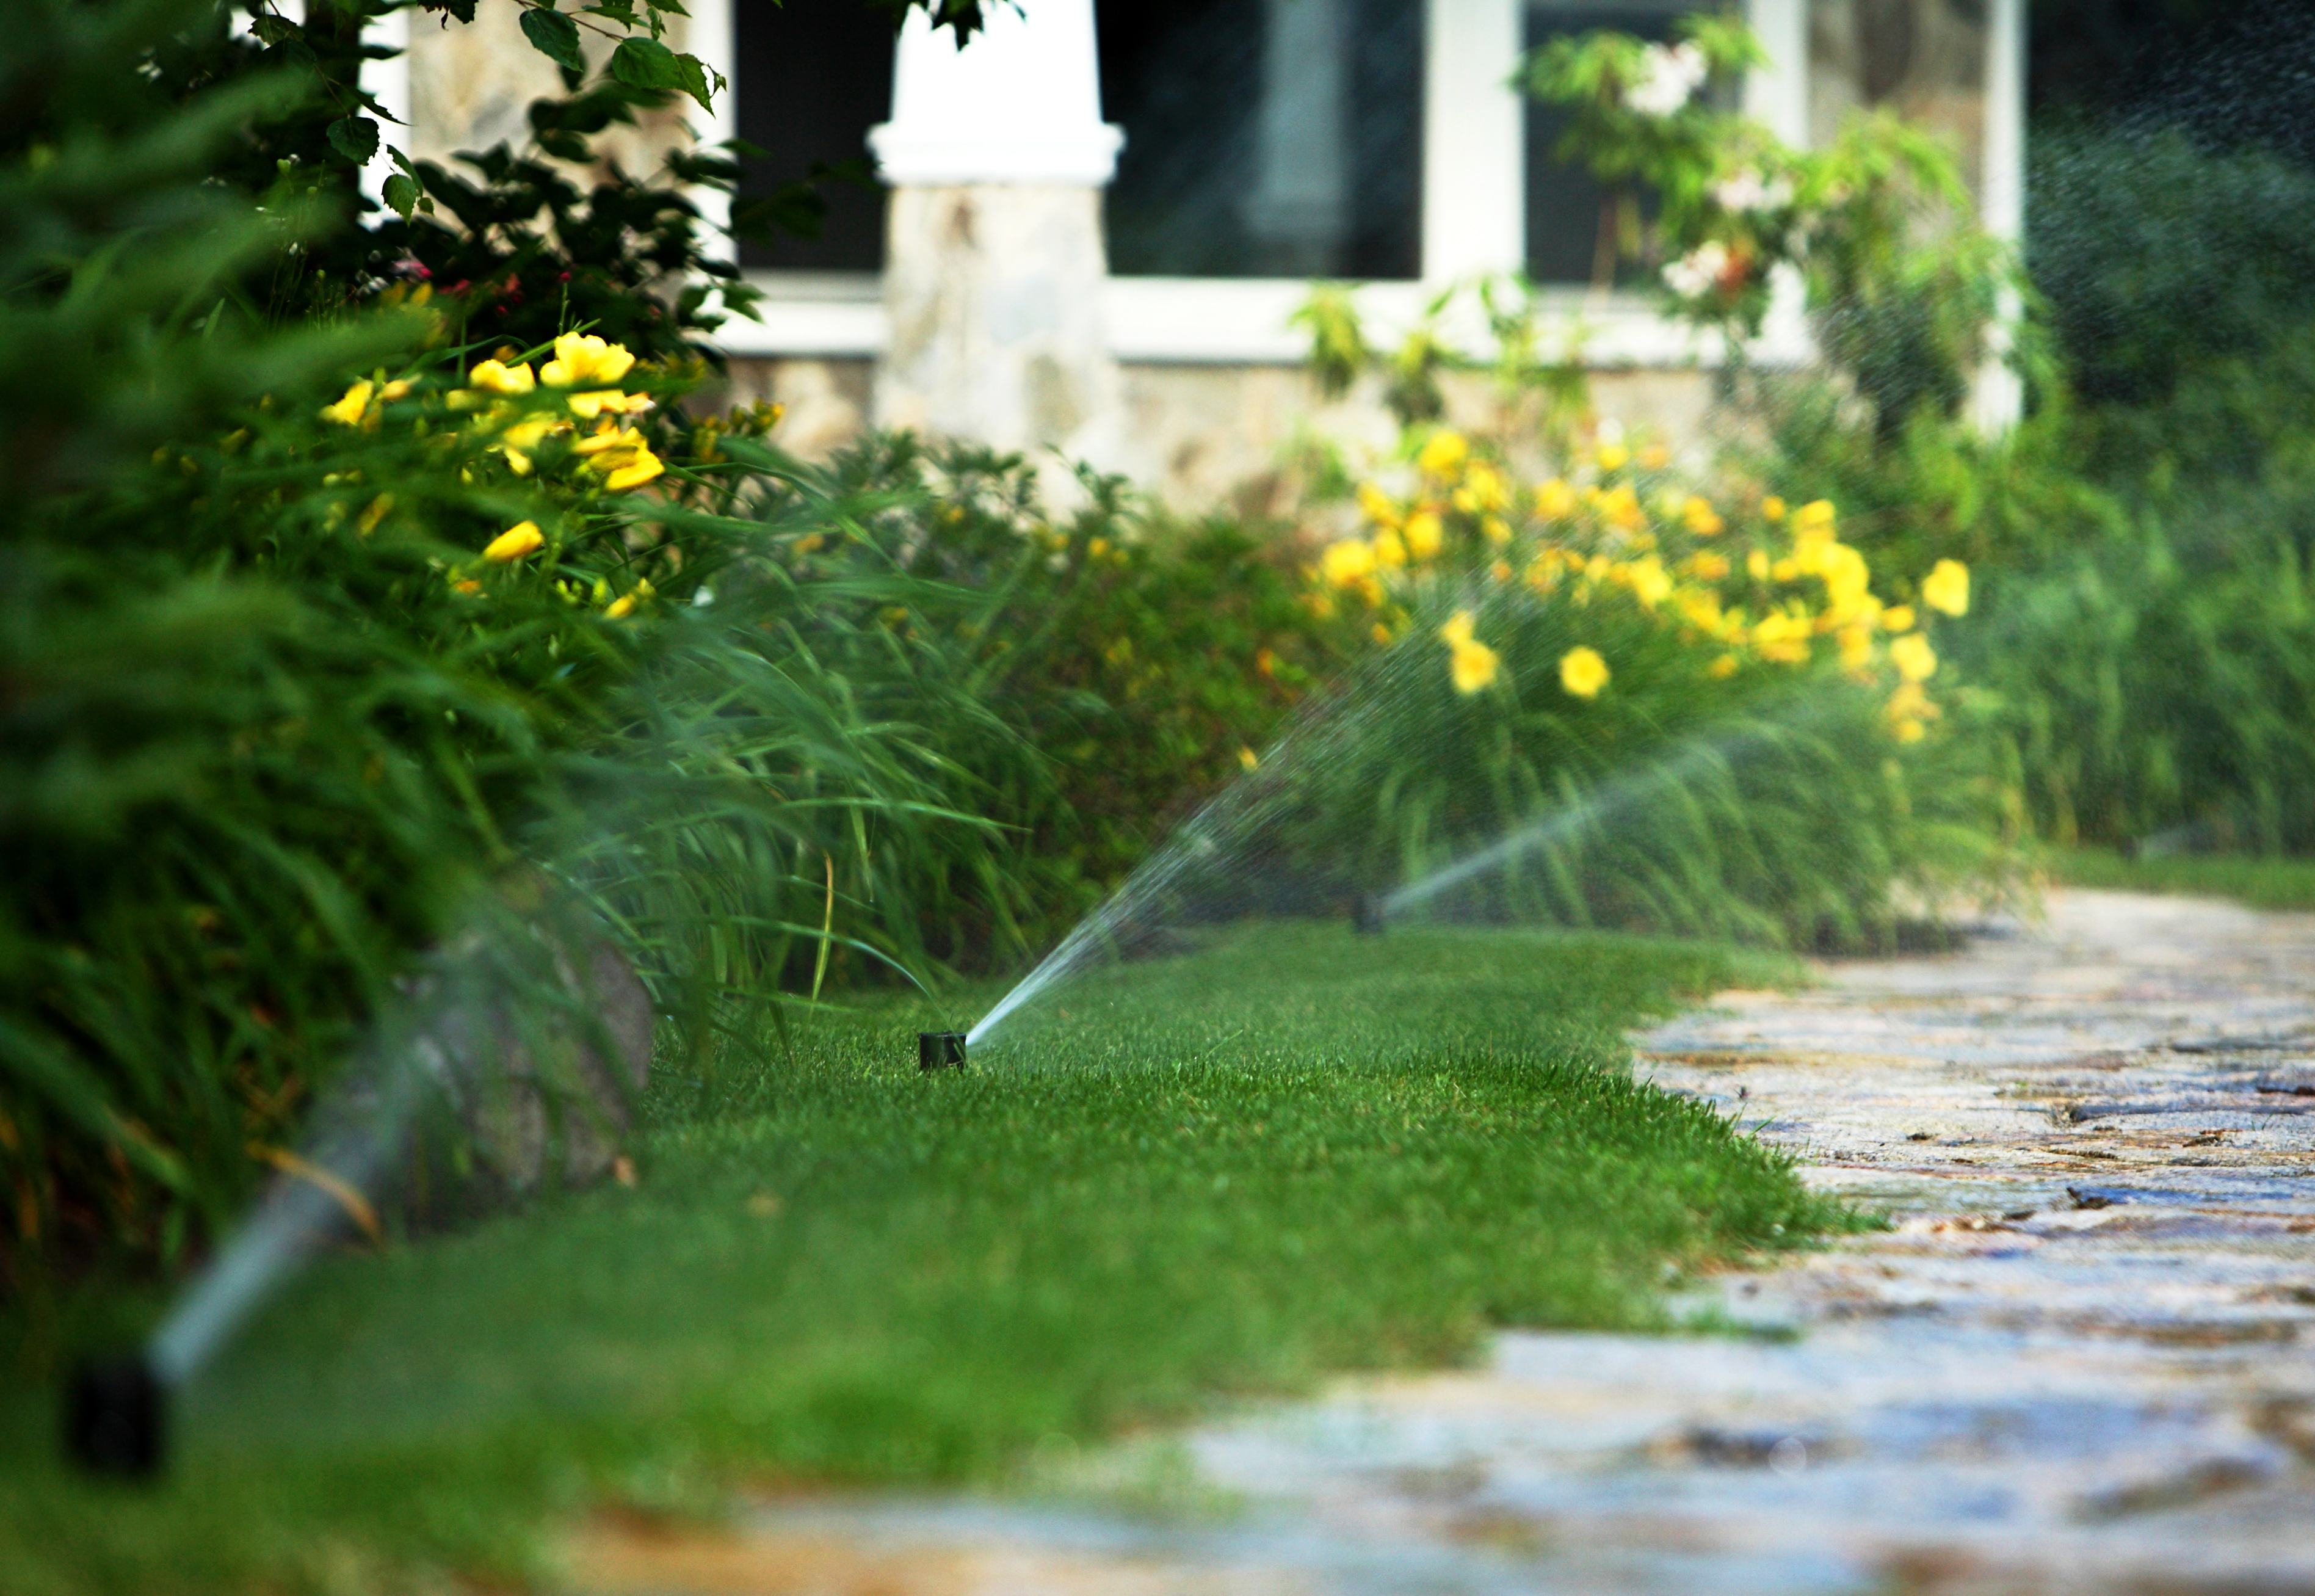 Expert Residential Irrigation Services in My Area